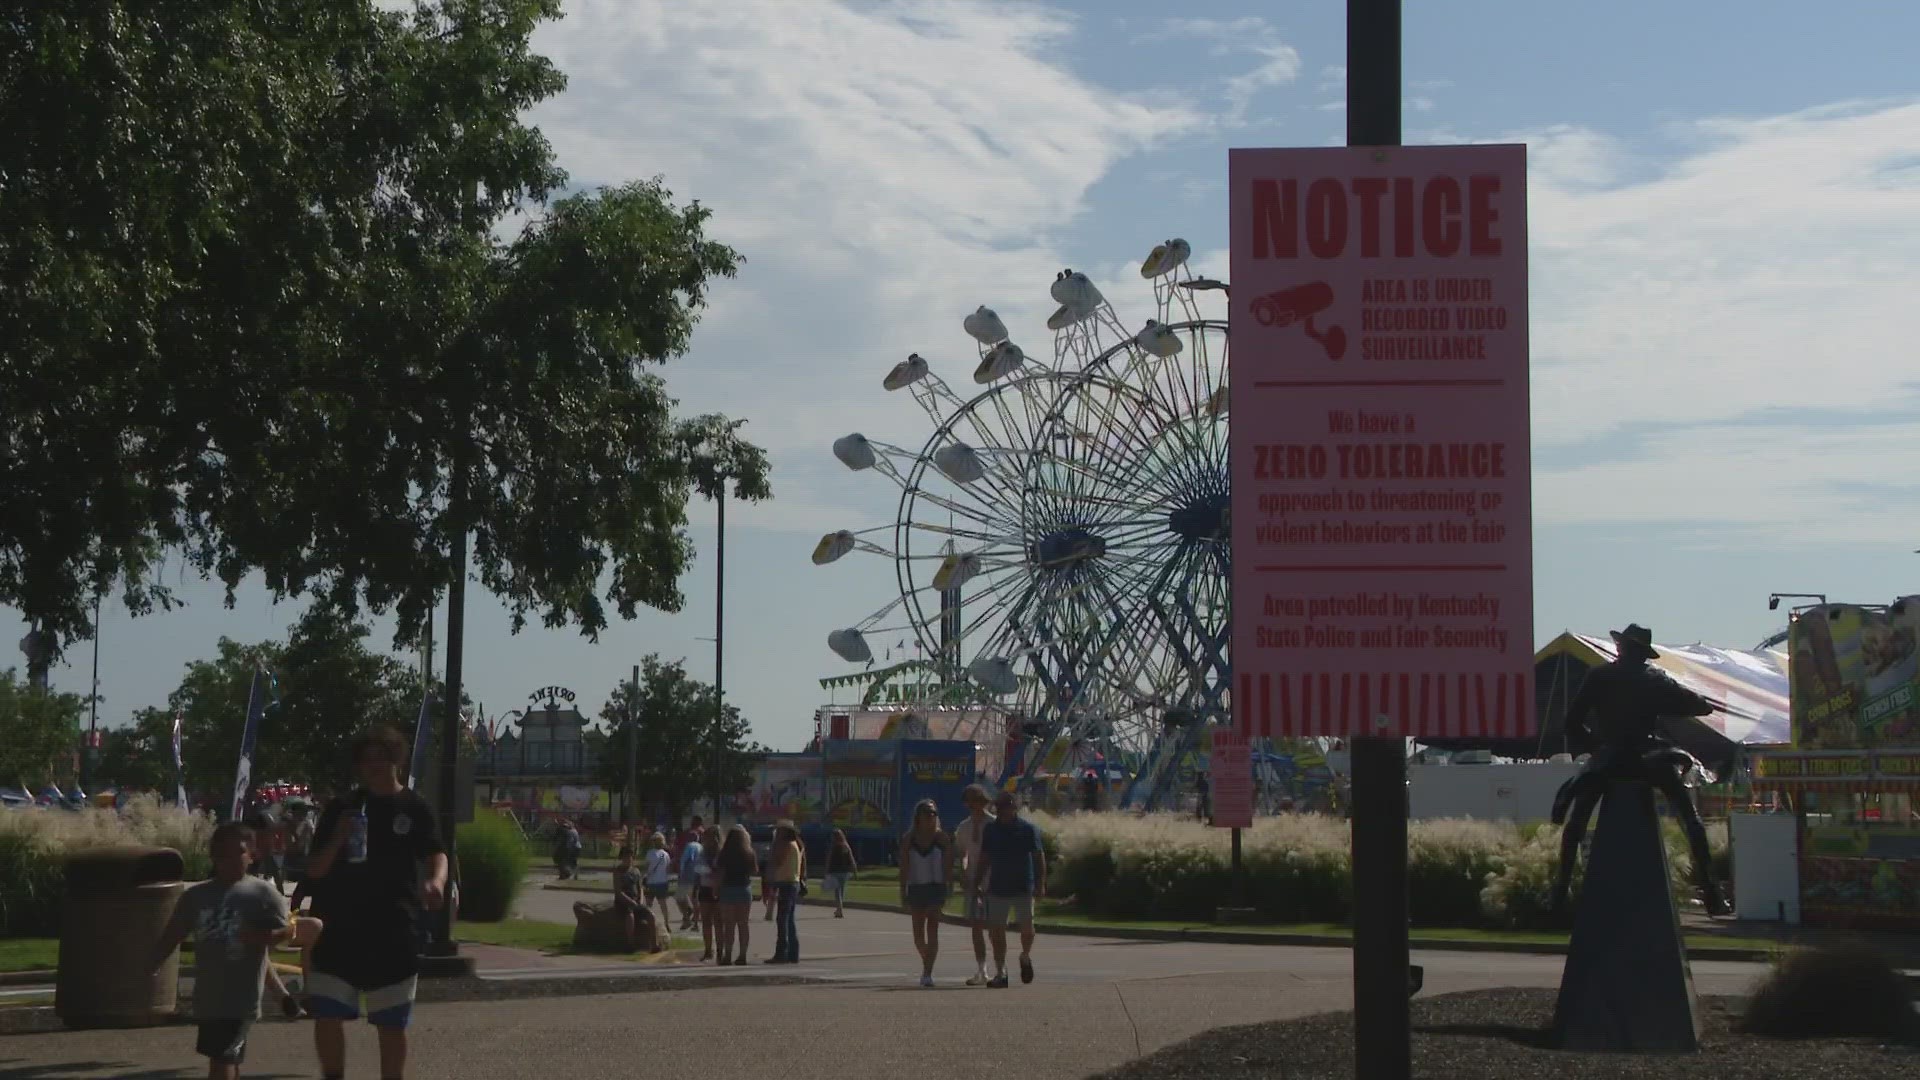 Despite the variety of food or ride choices at the Kentucky State Fair, safety was on the minds of many after an accidental shooting on Saturday.